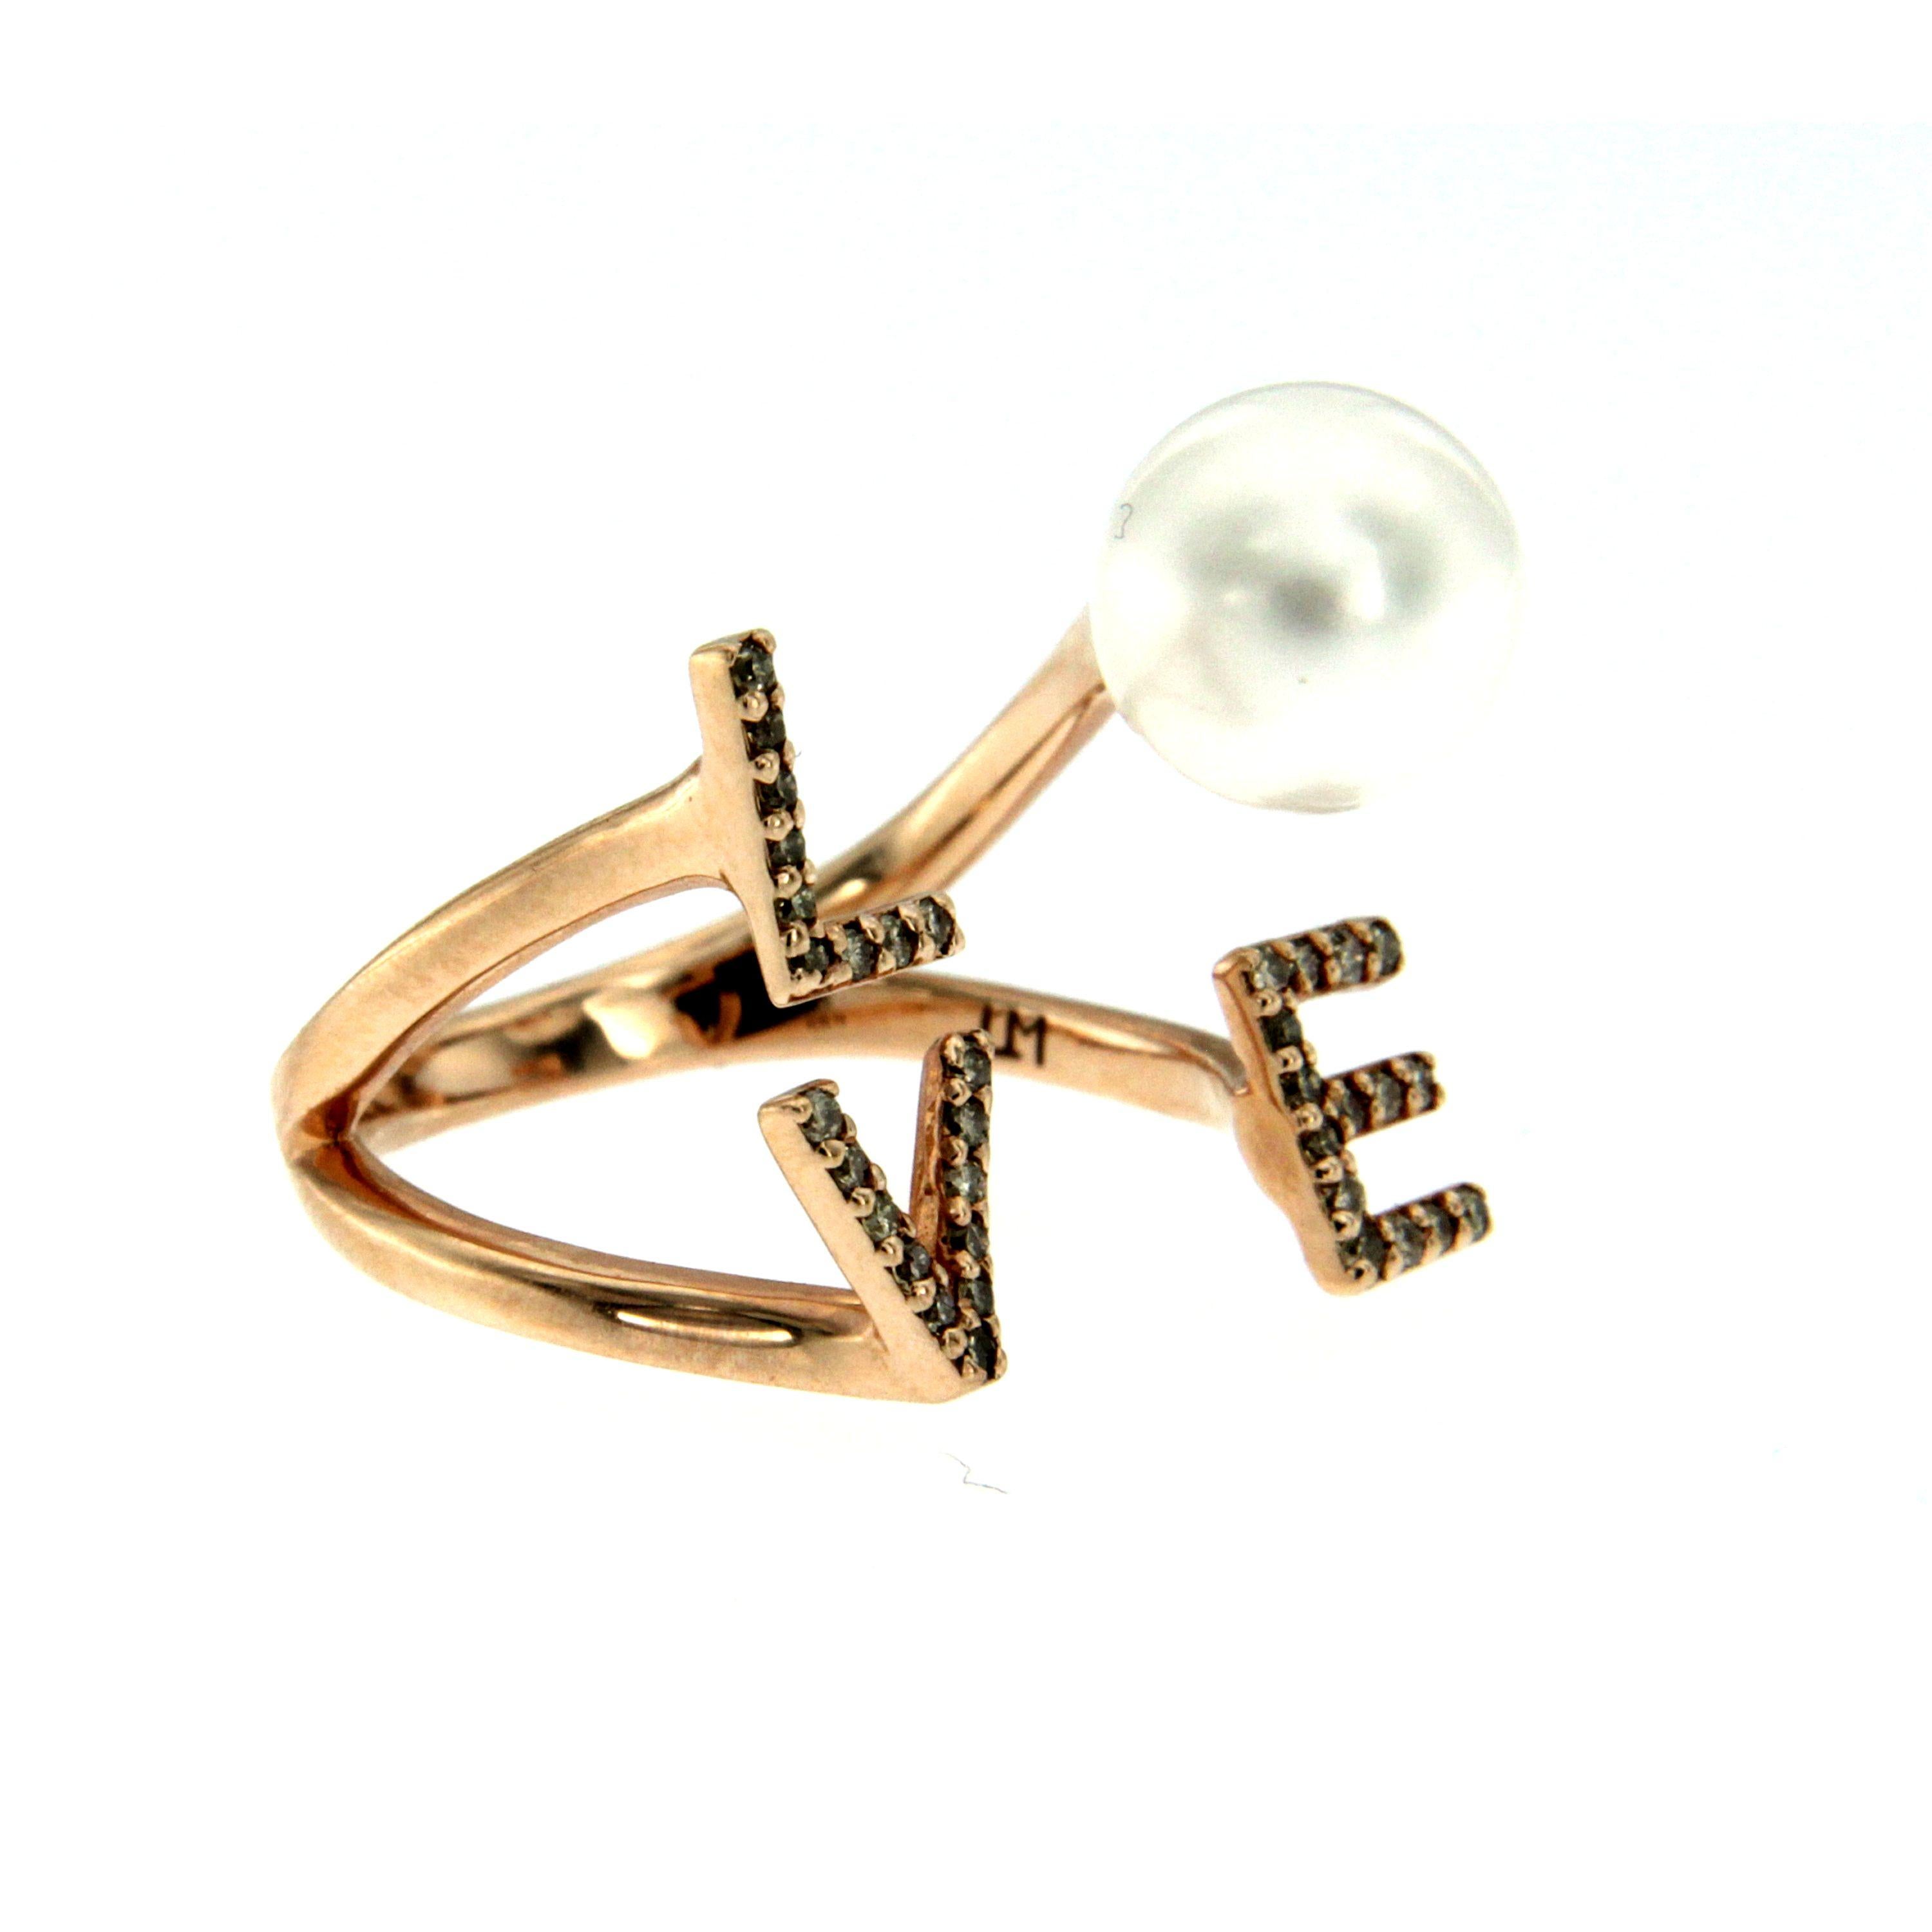 This 14k rose gold ring is adorned with 